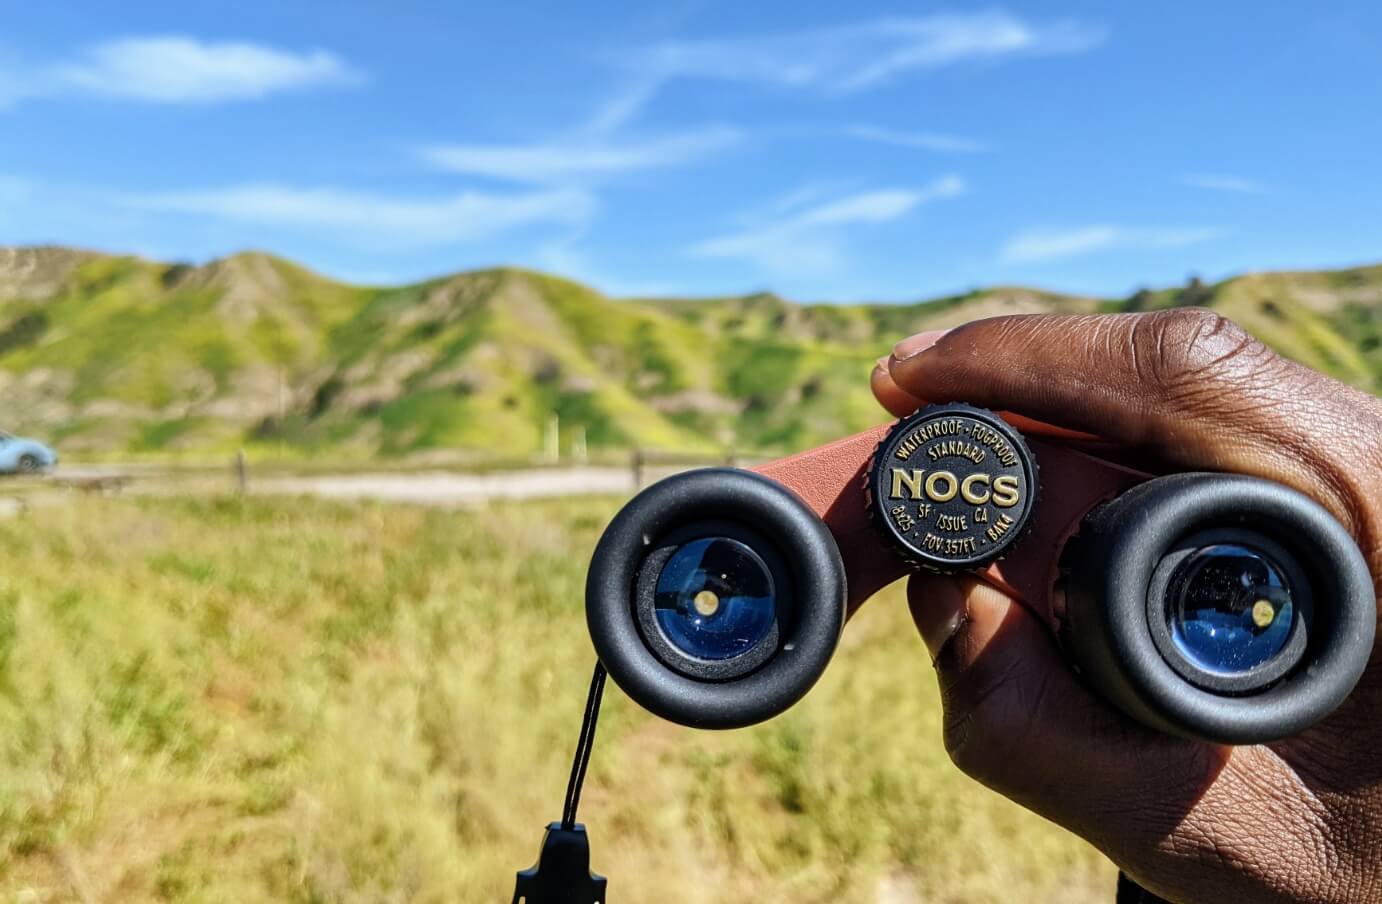 Close up picture of a pair of Nocs being held, with grass hills in the distance